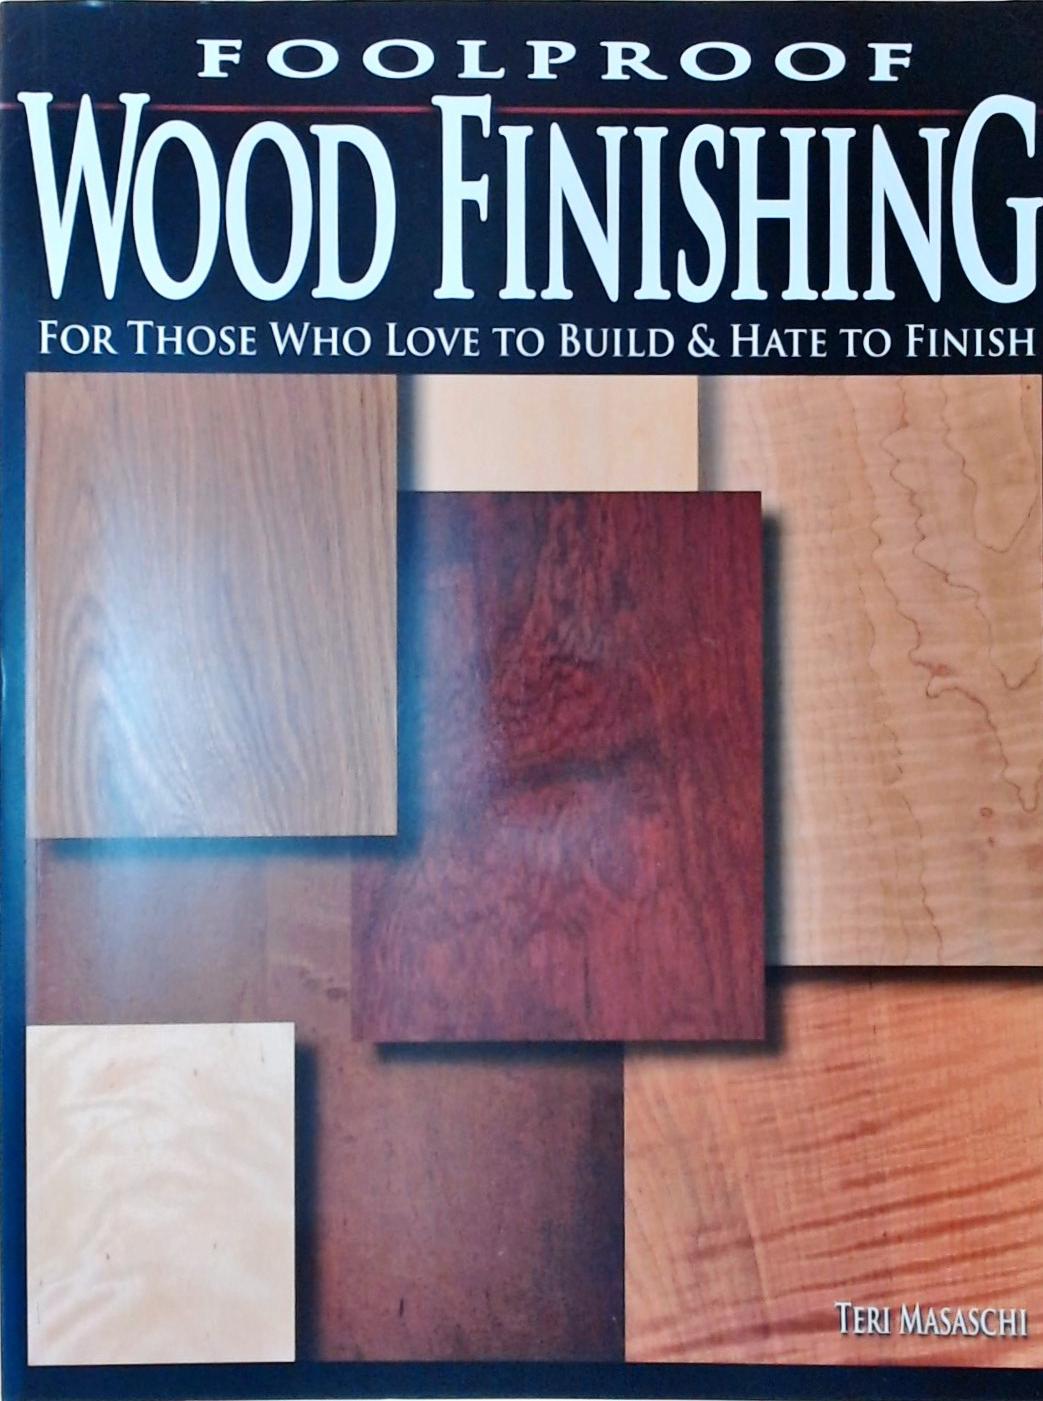 Foolproof Wood Finishing For Those Who Love to Build and Hate to Finish